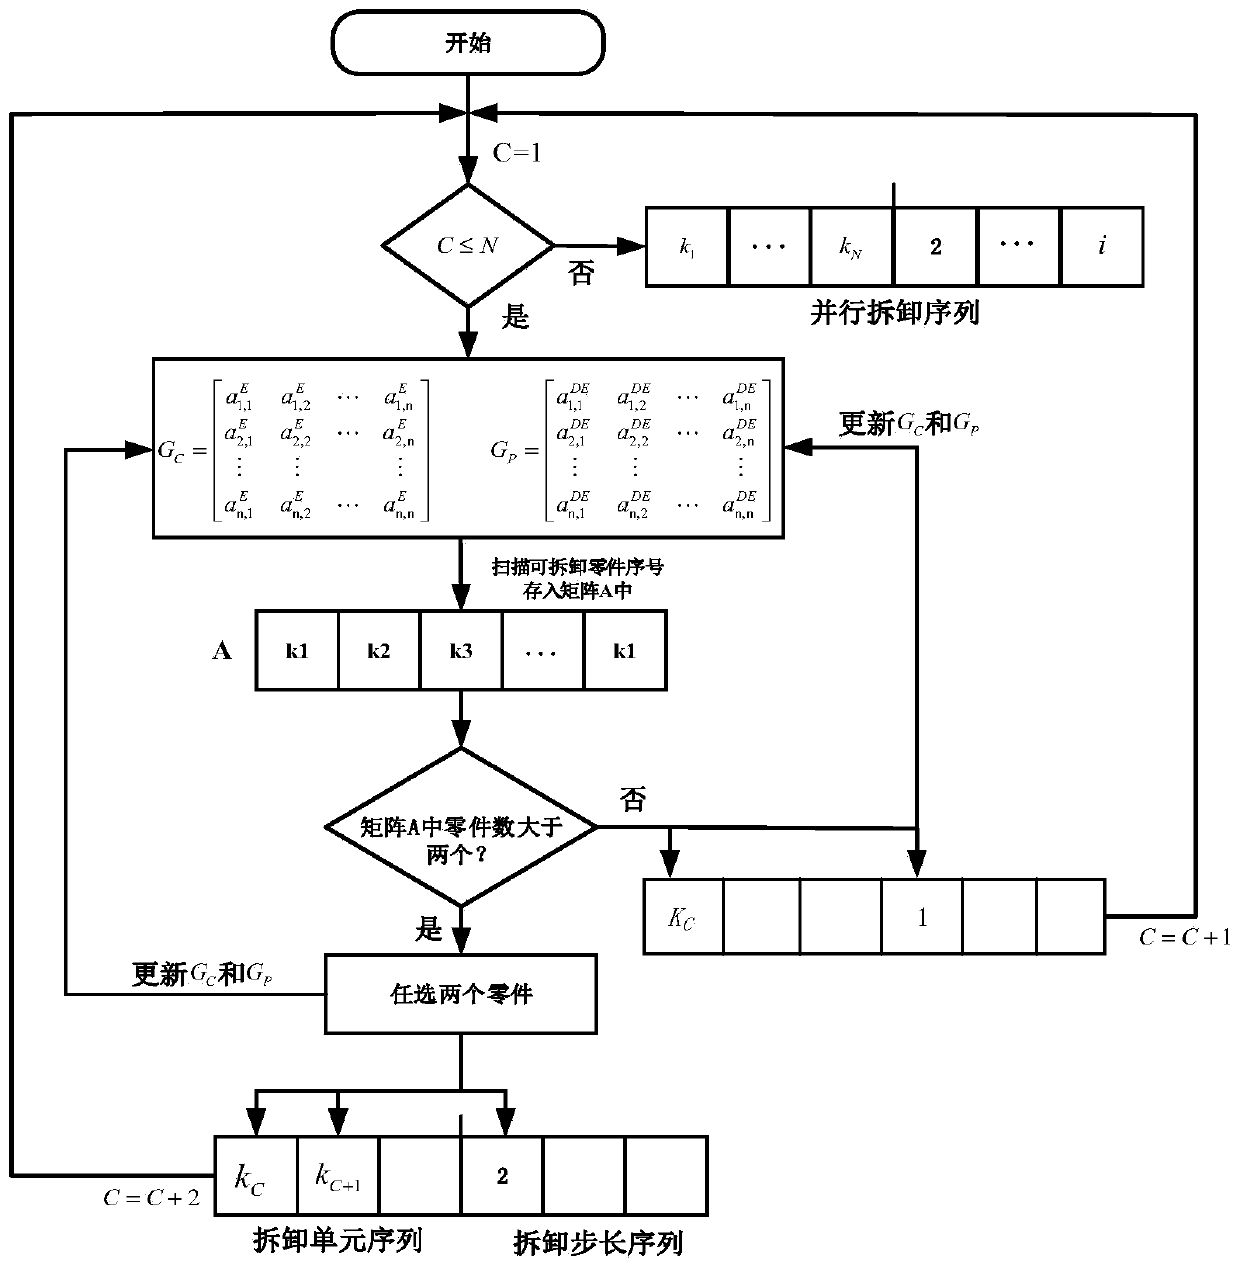 A parallel disassembly model construction method based on a genetic algorithm